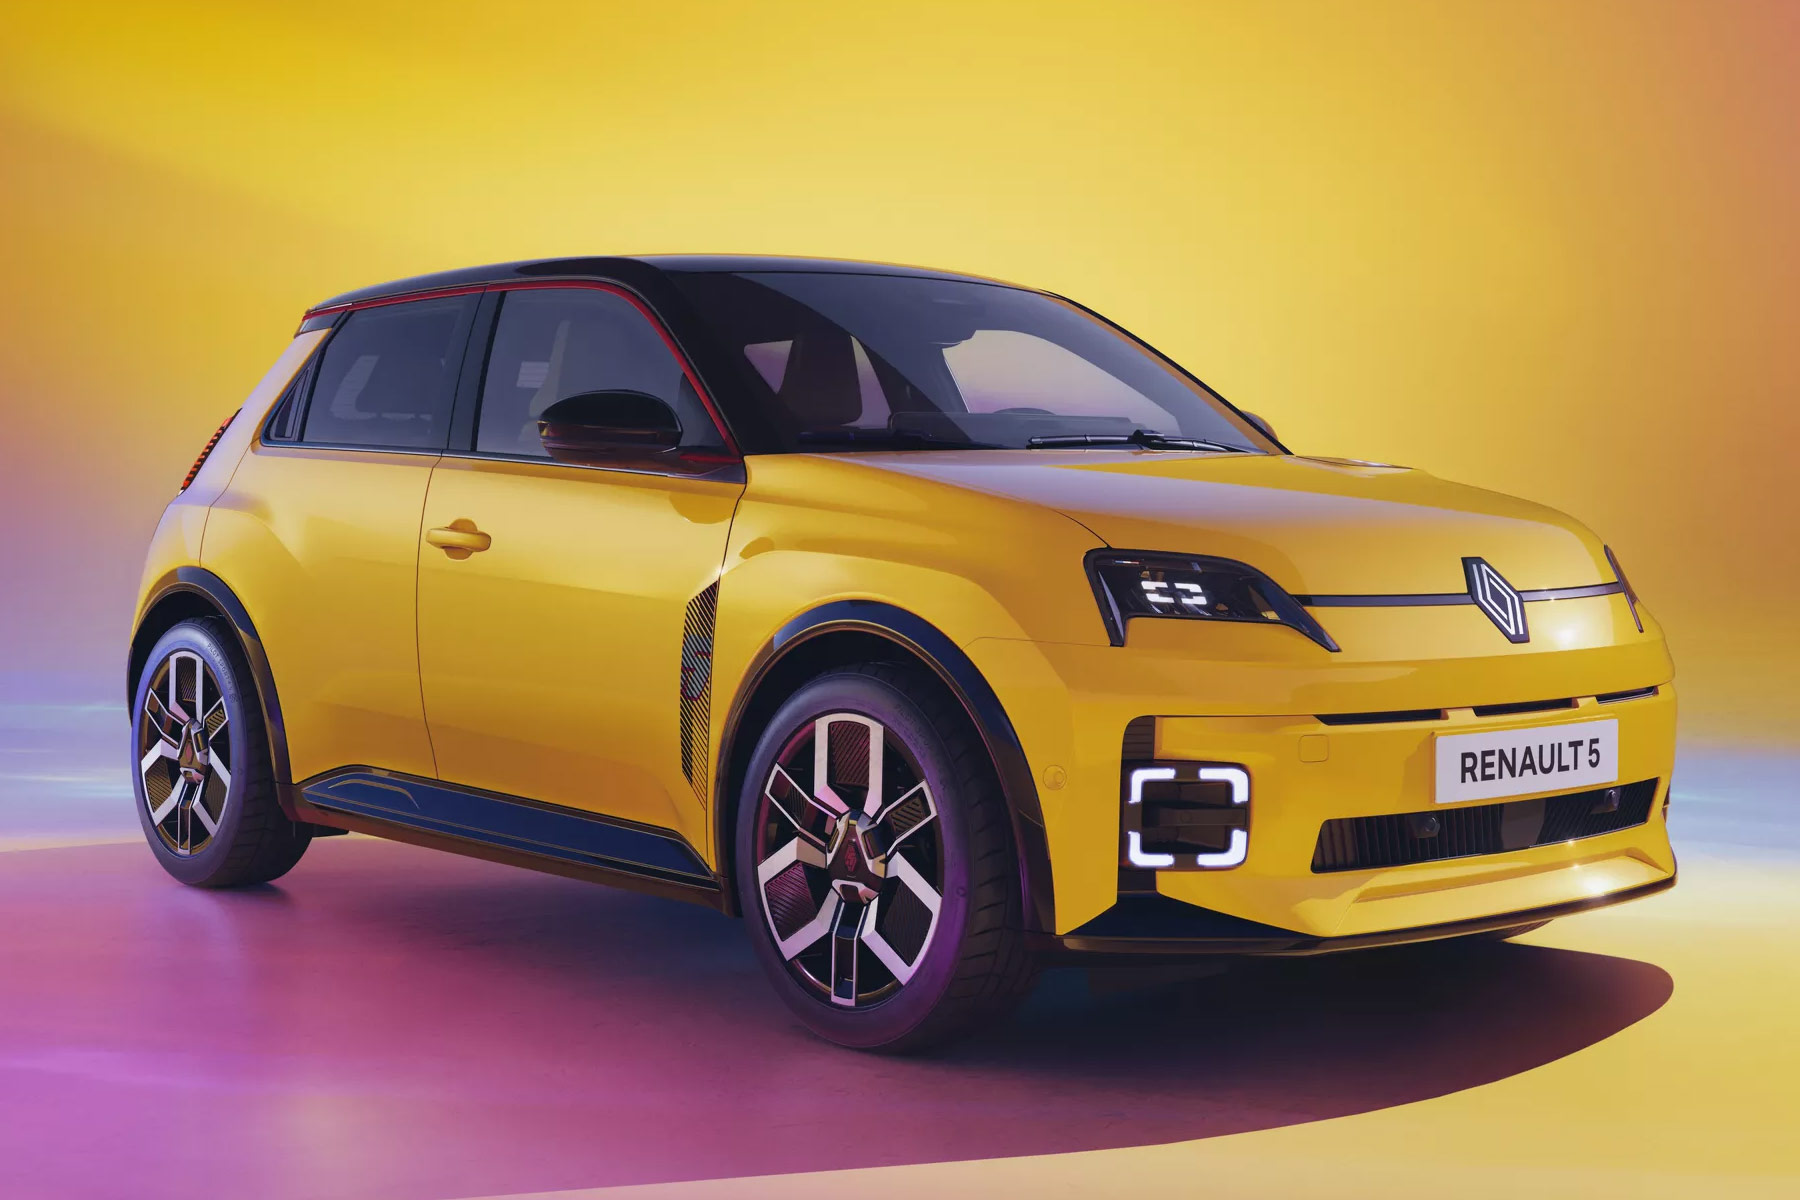 Renault introduces the fully electric Renault 5, comes with the Vivaldi web browser